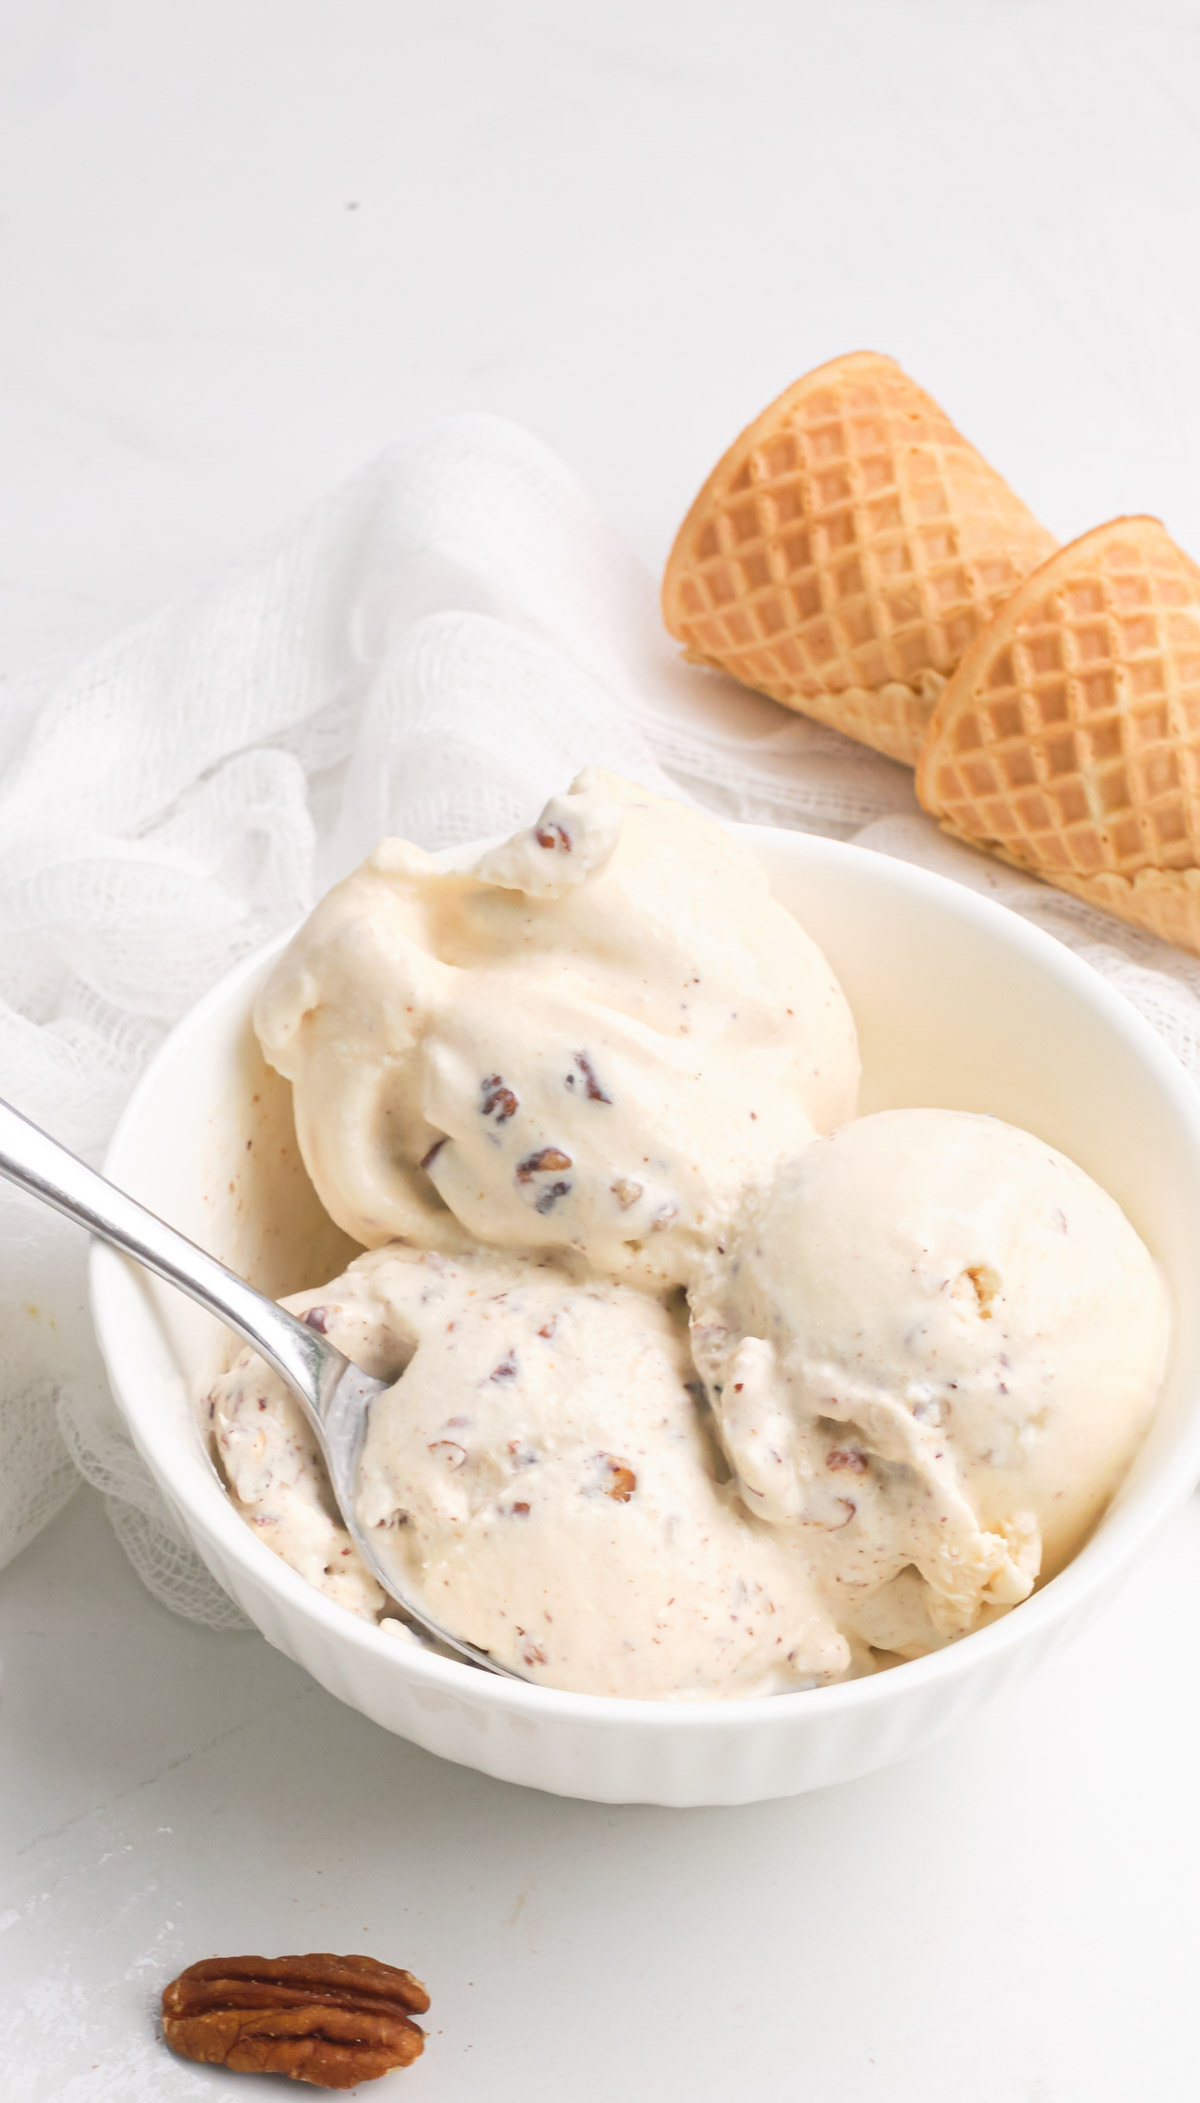 three scoops of the butter pecan ice cream in a white bowl with a spoon and two ice cream cones.